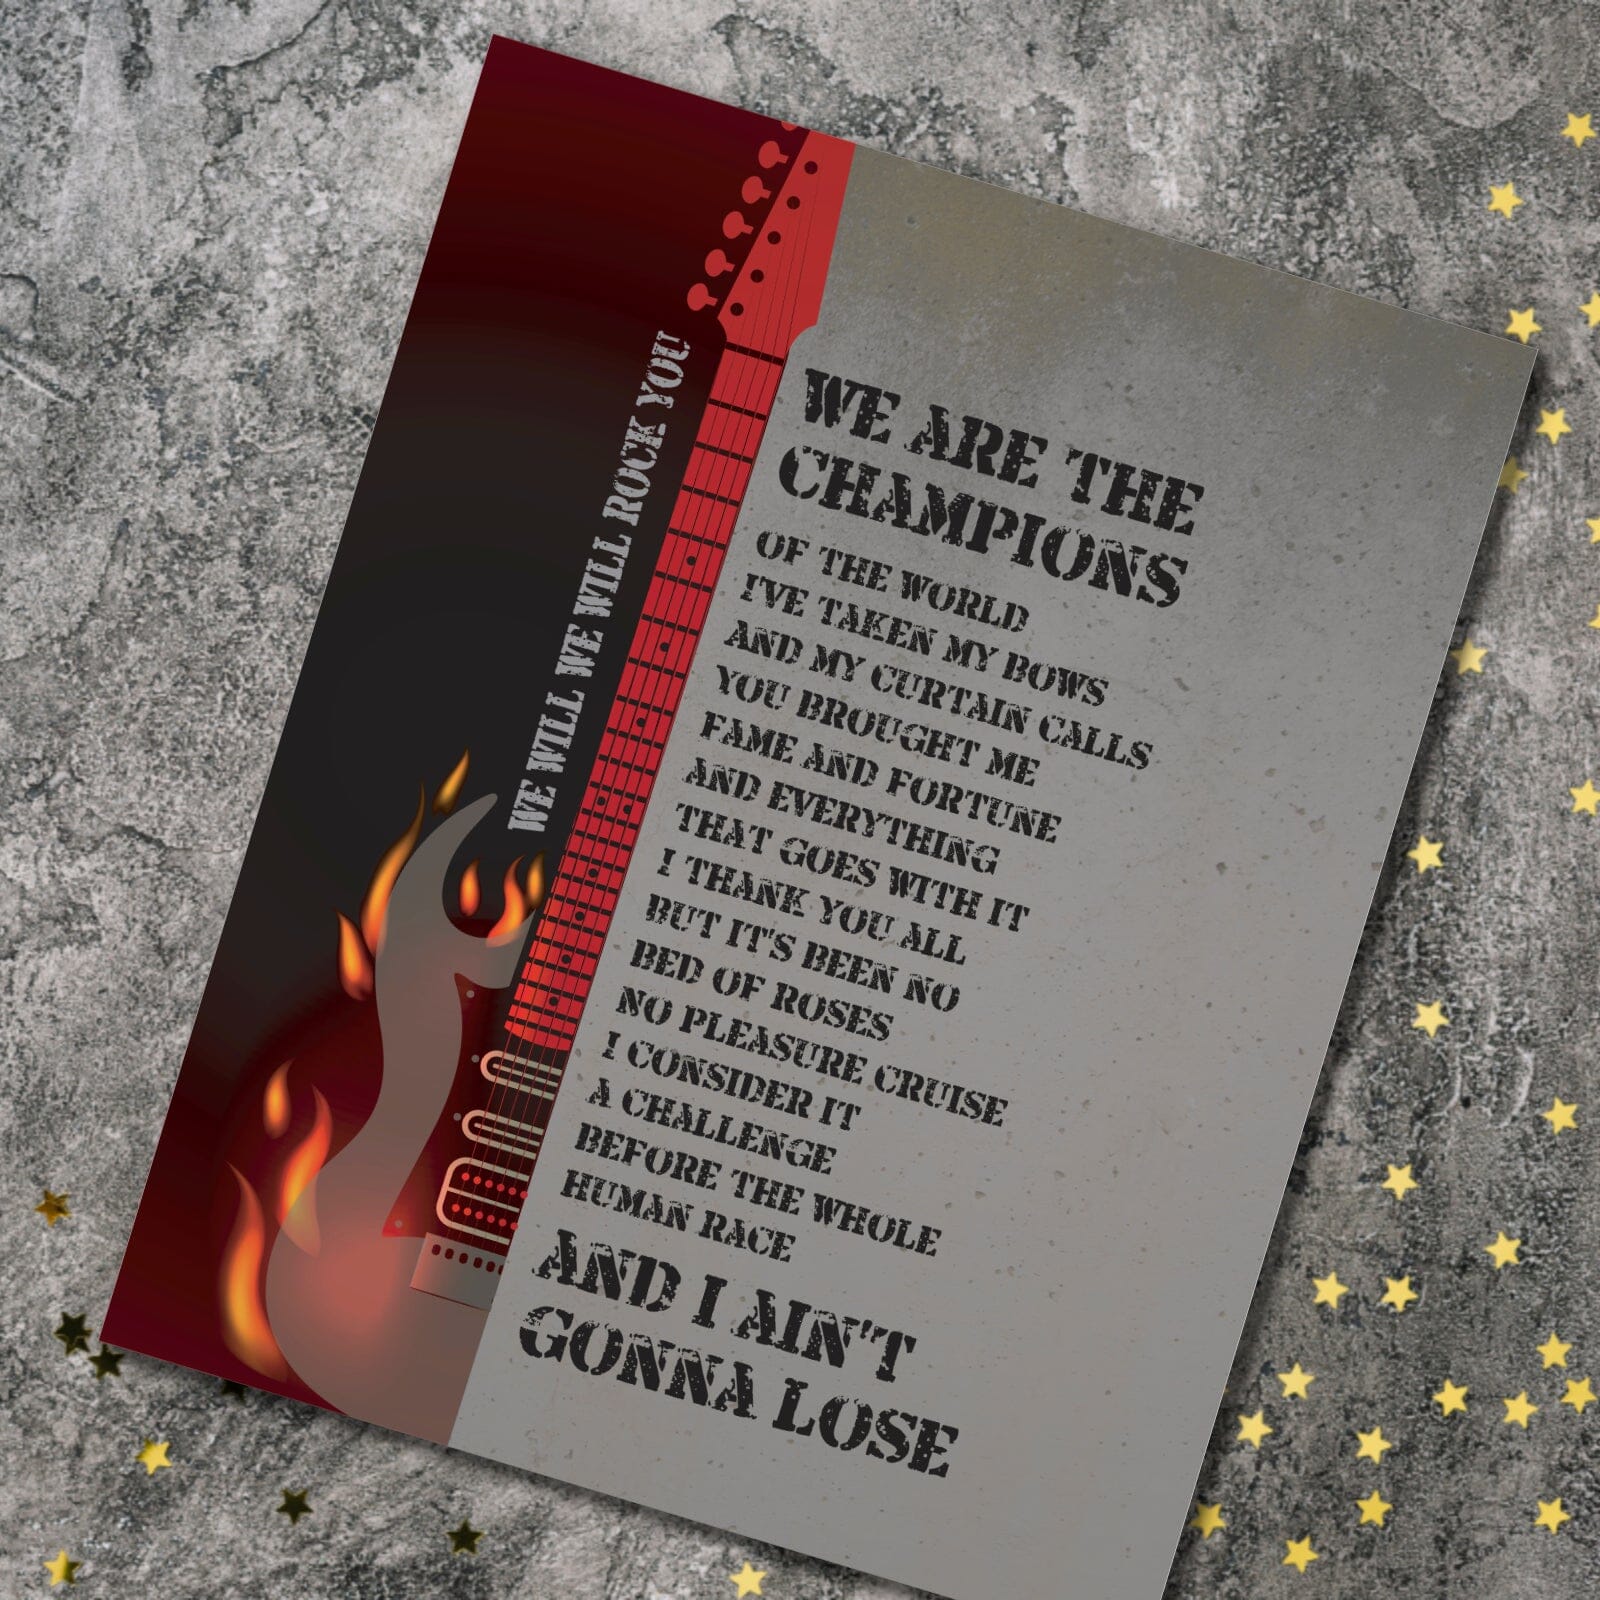 We Will Rock You, We are the Champions by Queen - Lyric Art Song Lyrics Art Song Lyrics Art 8x10 Unframed Print 